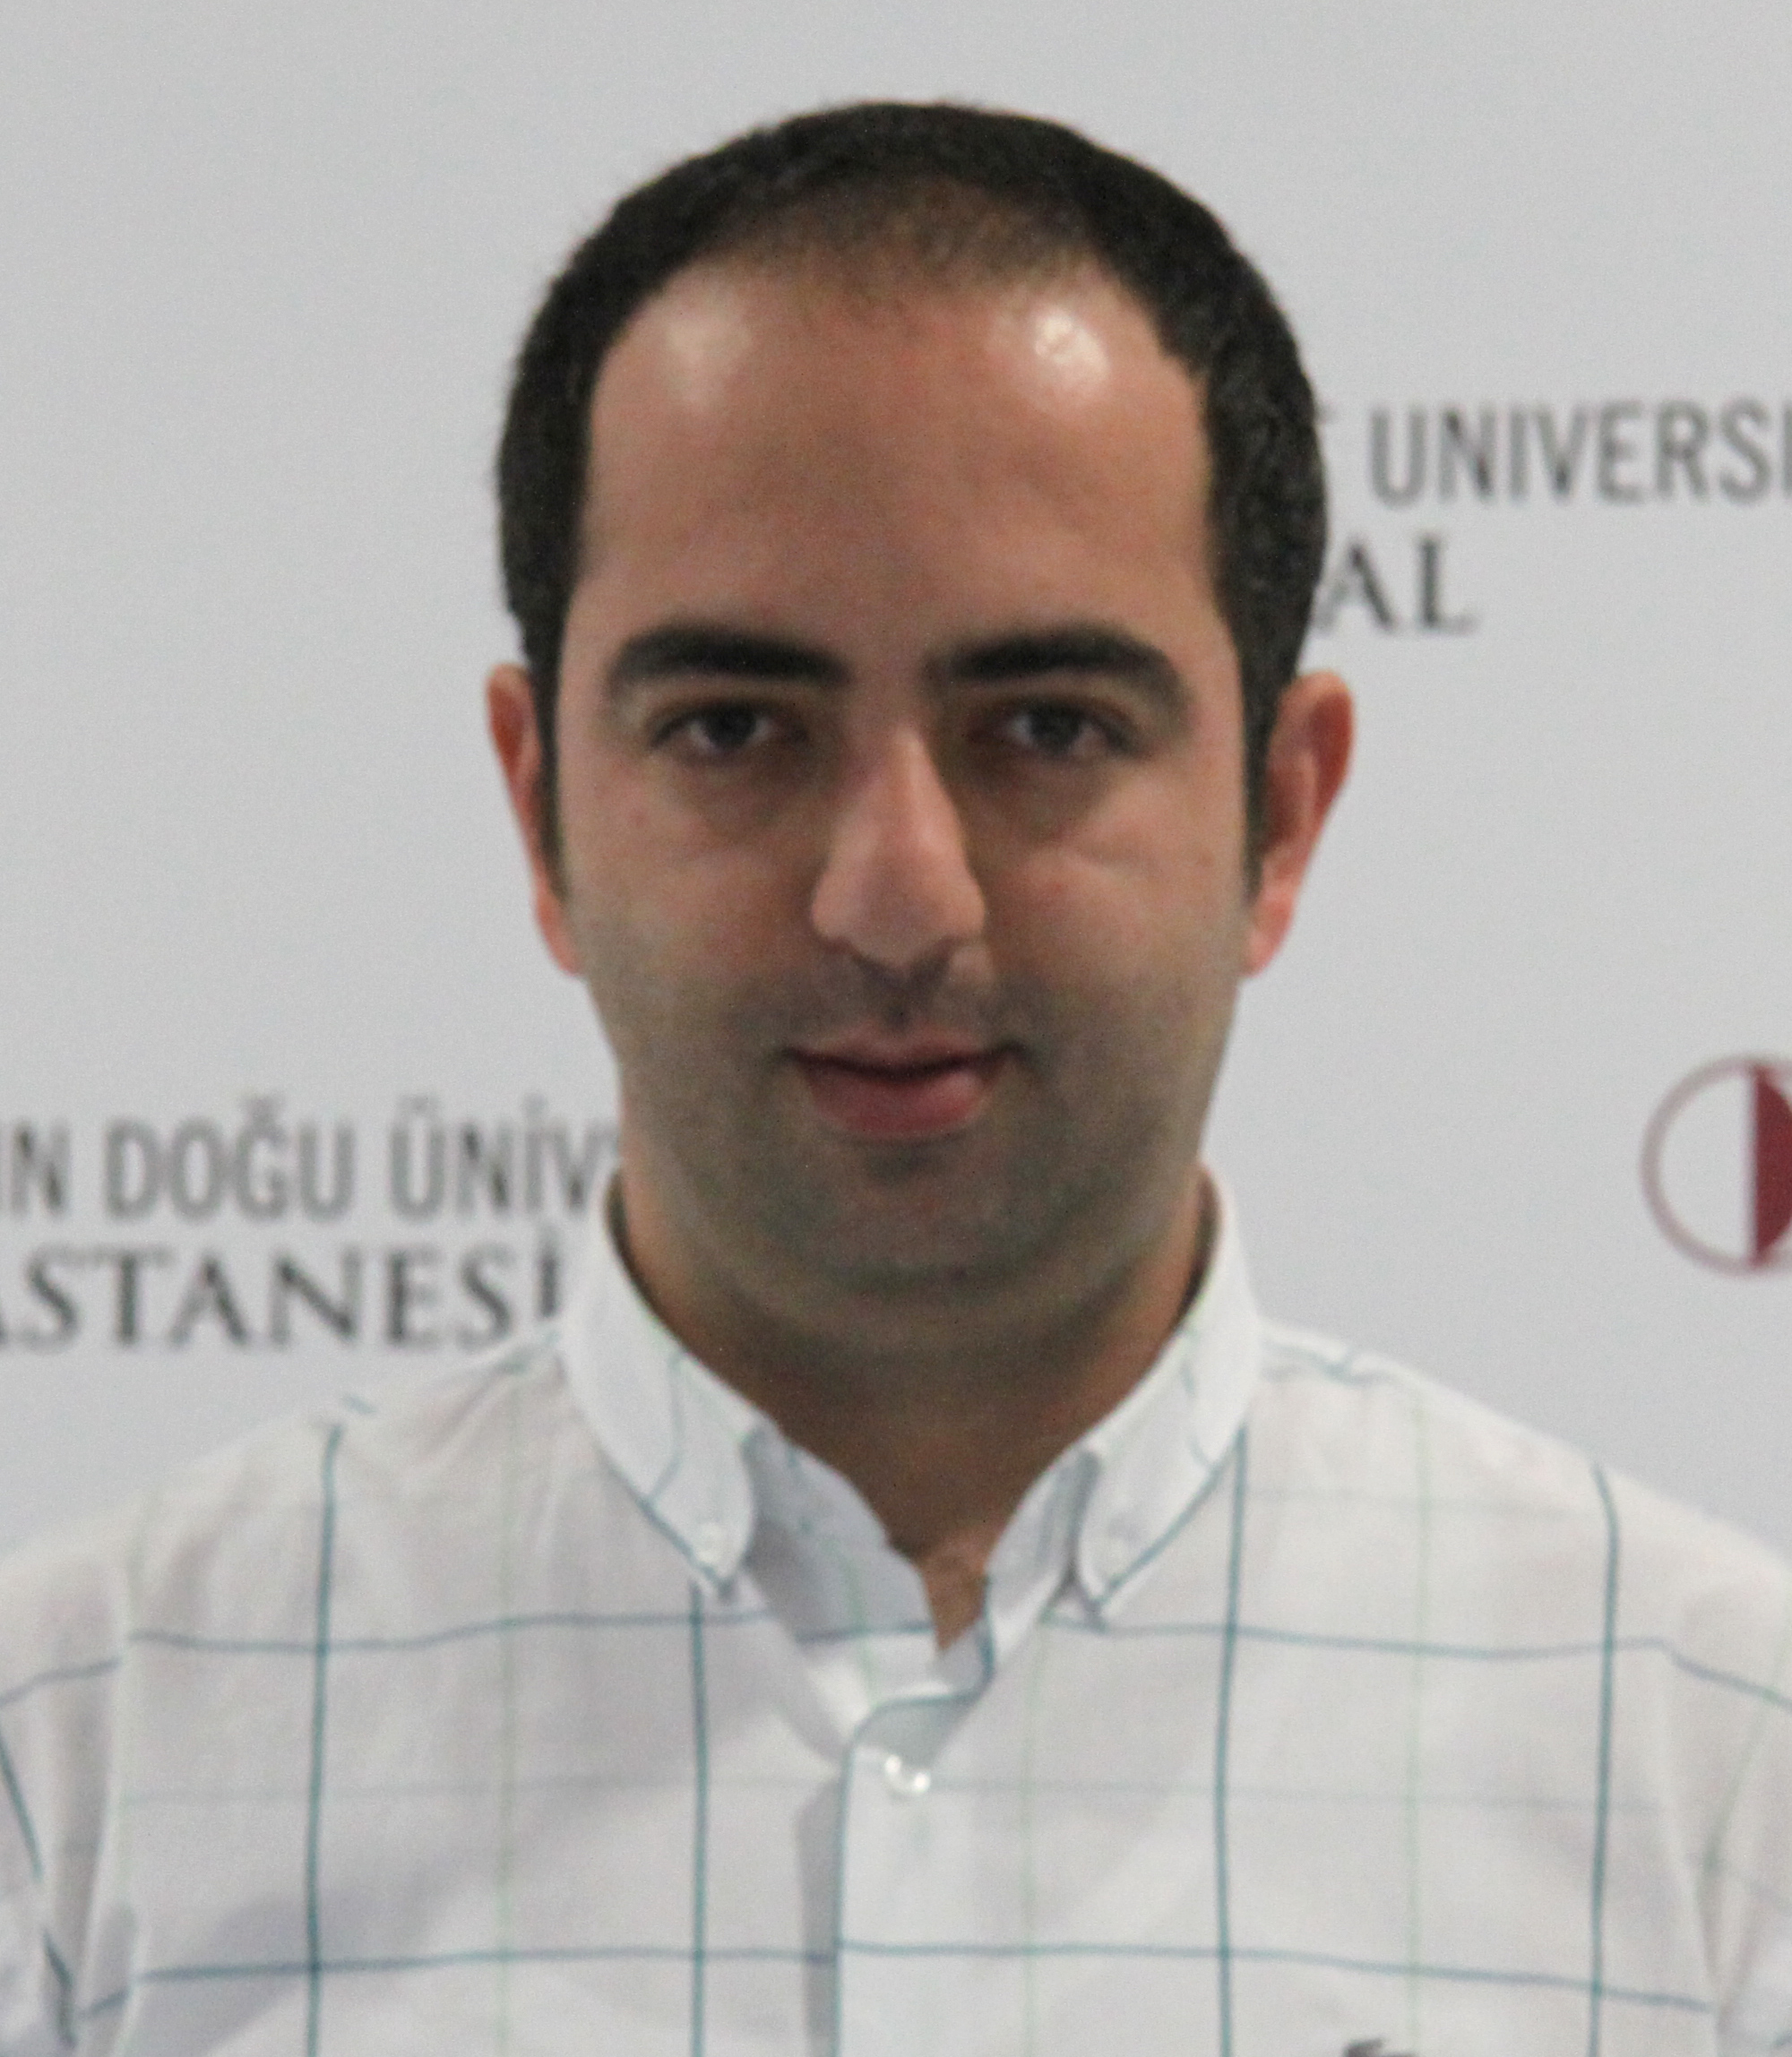 Dr. Barış Polat, specialist at Near East University Hospital, is one of the eight Turkish winners of the European Orthopedic and Traumatology Proficiency Exam this year